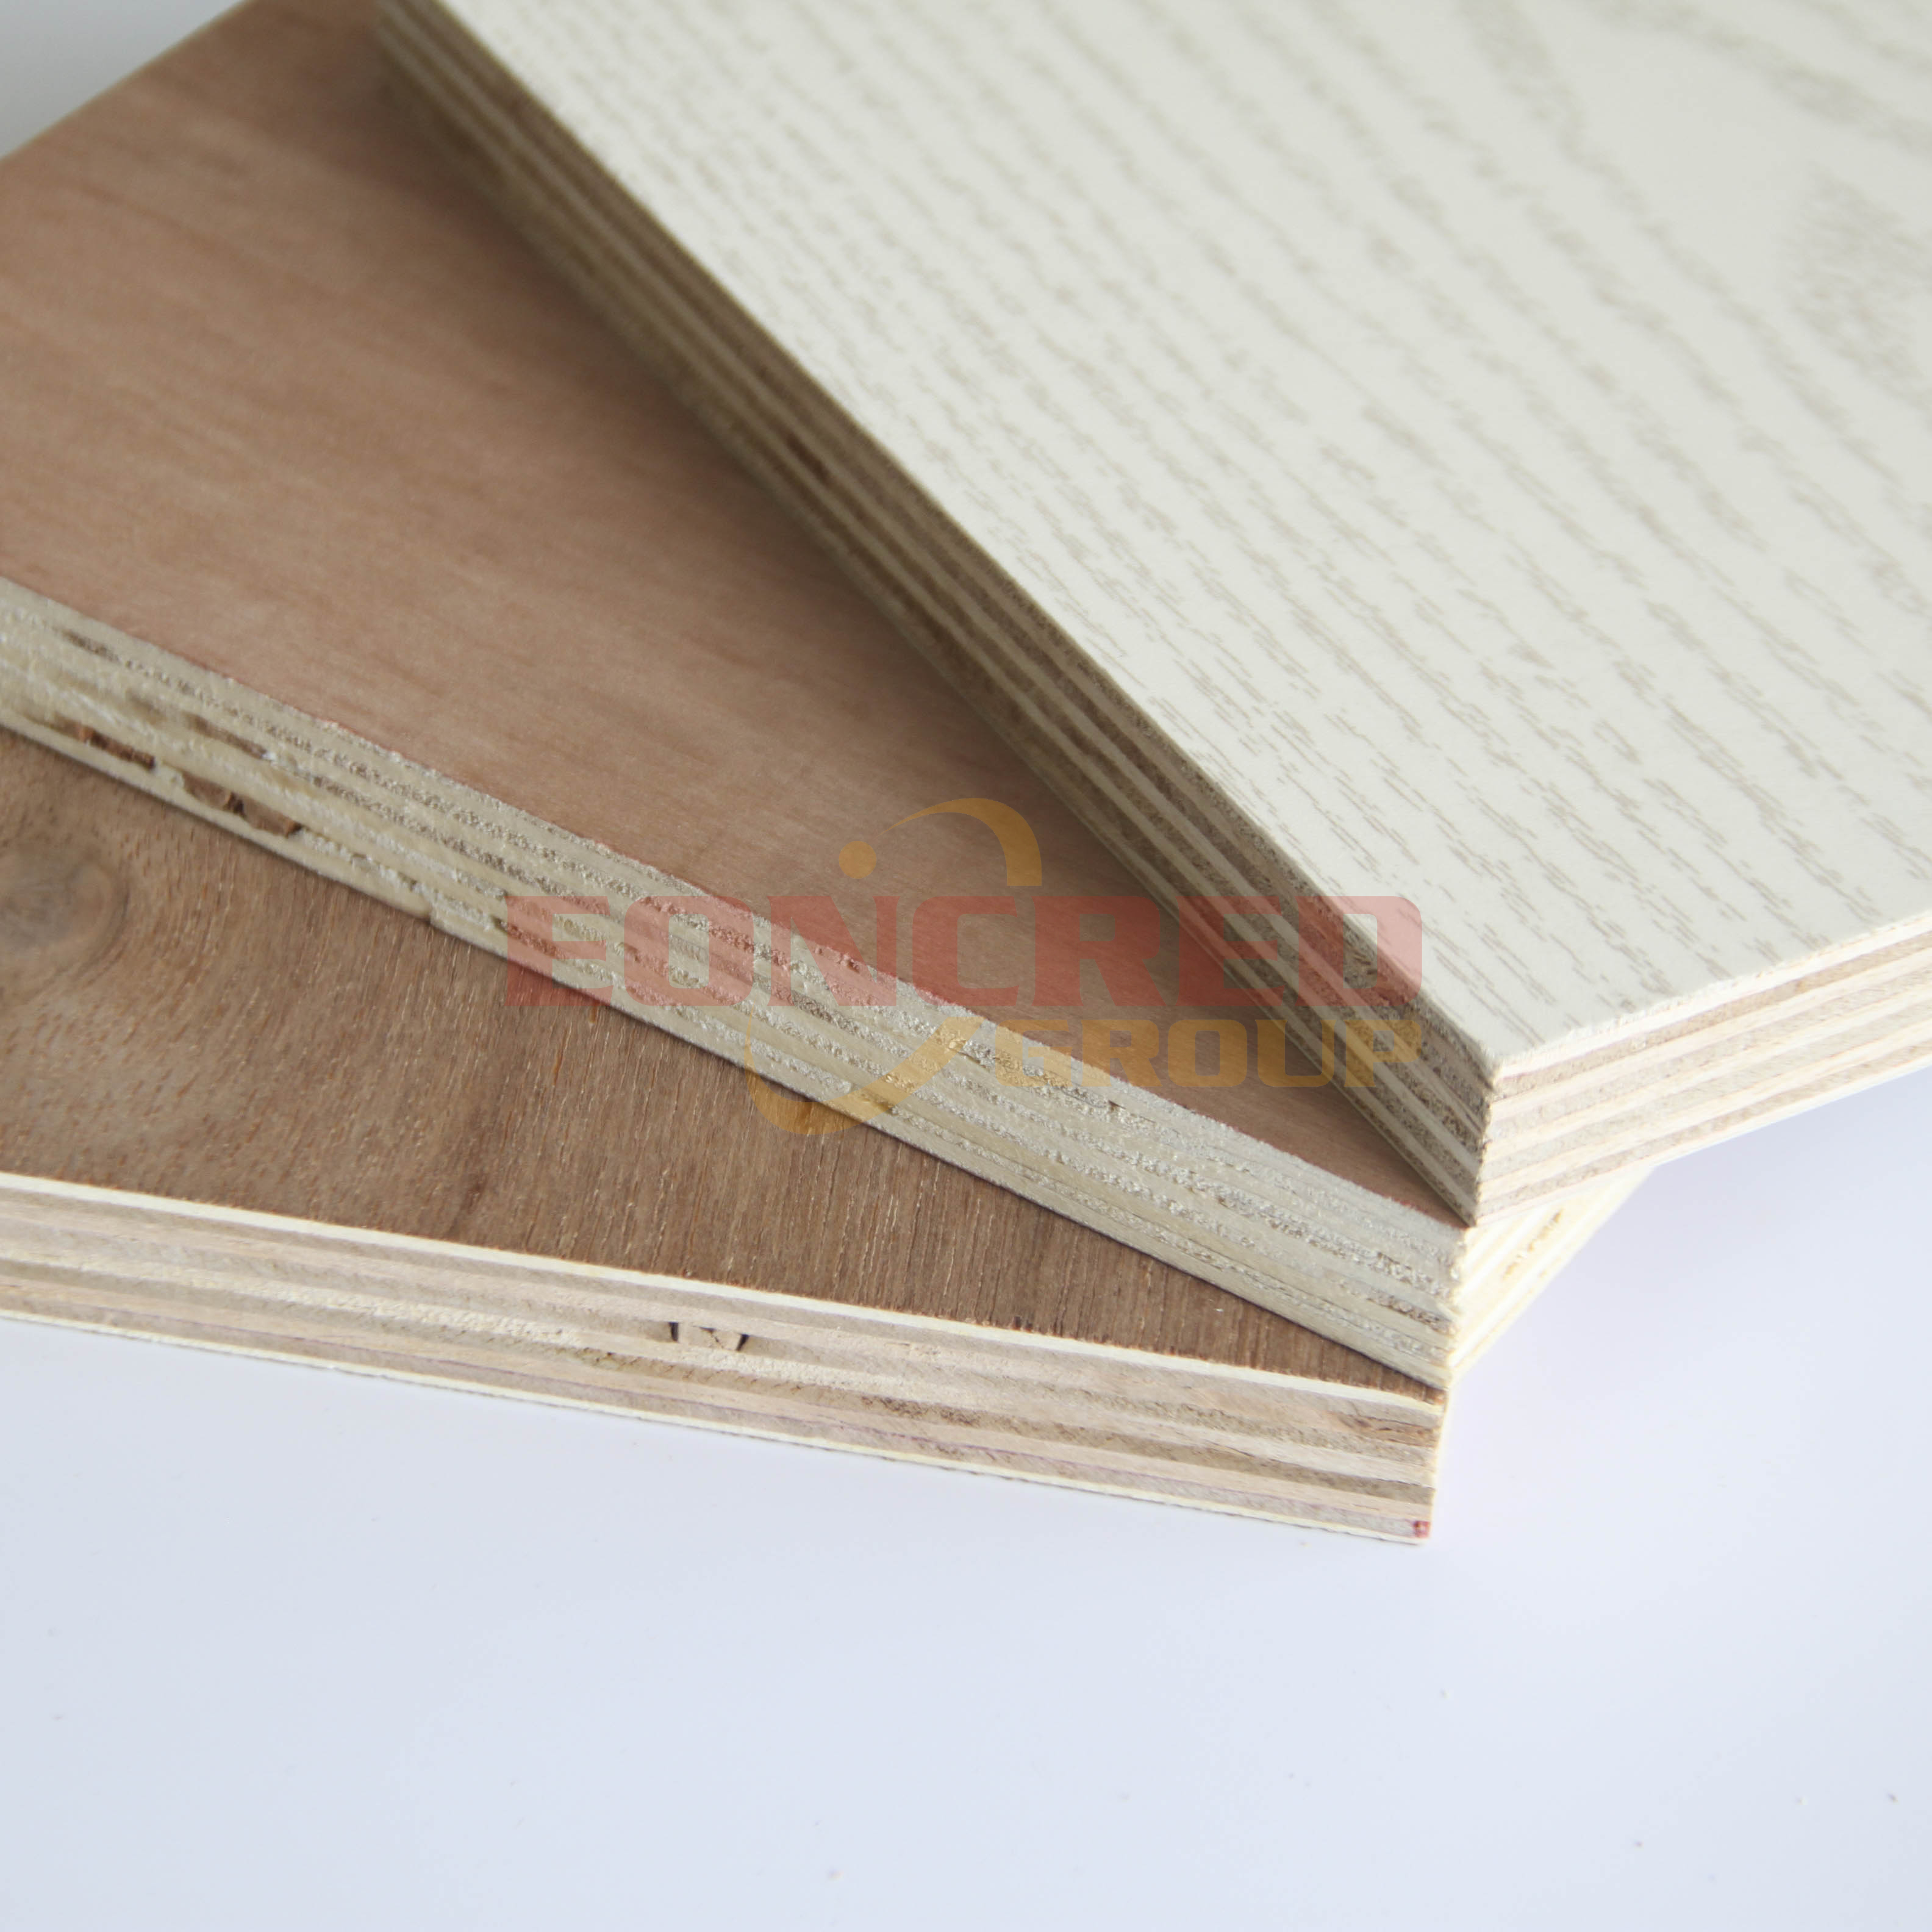 Bamboo Board Vertical Plywood of Hot Selling